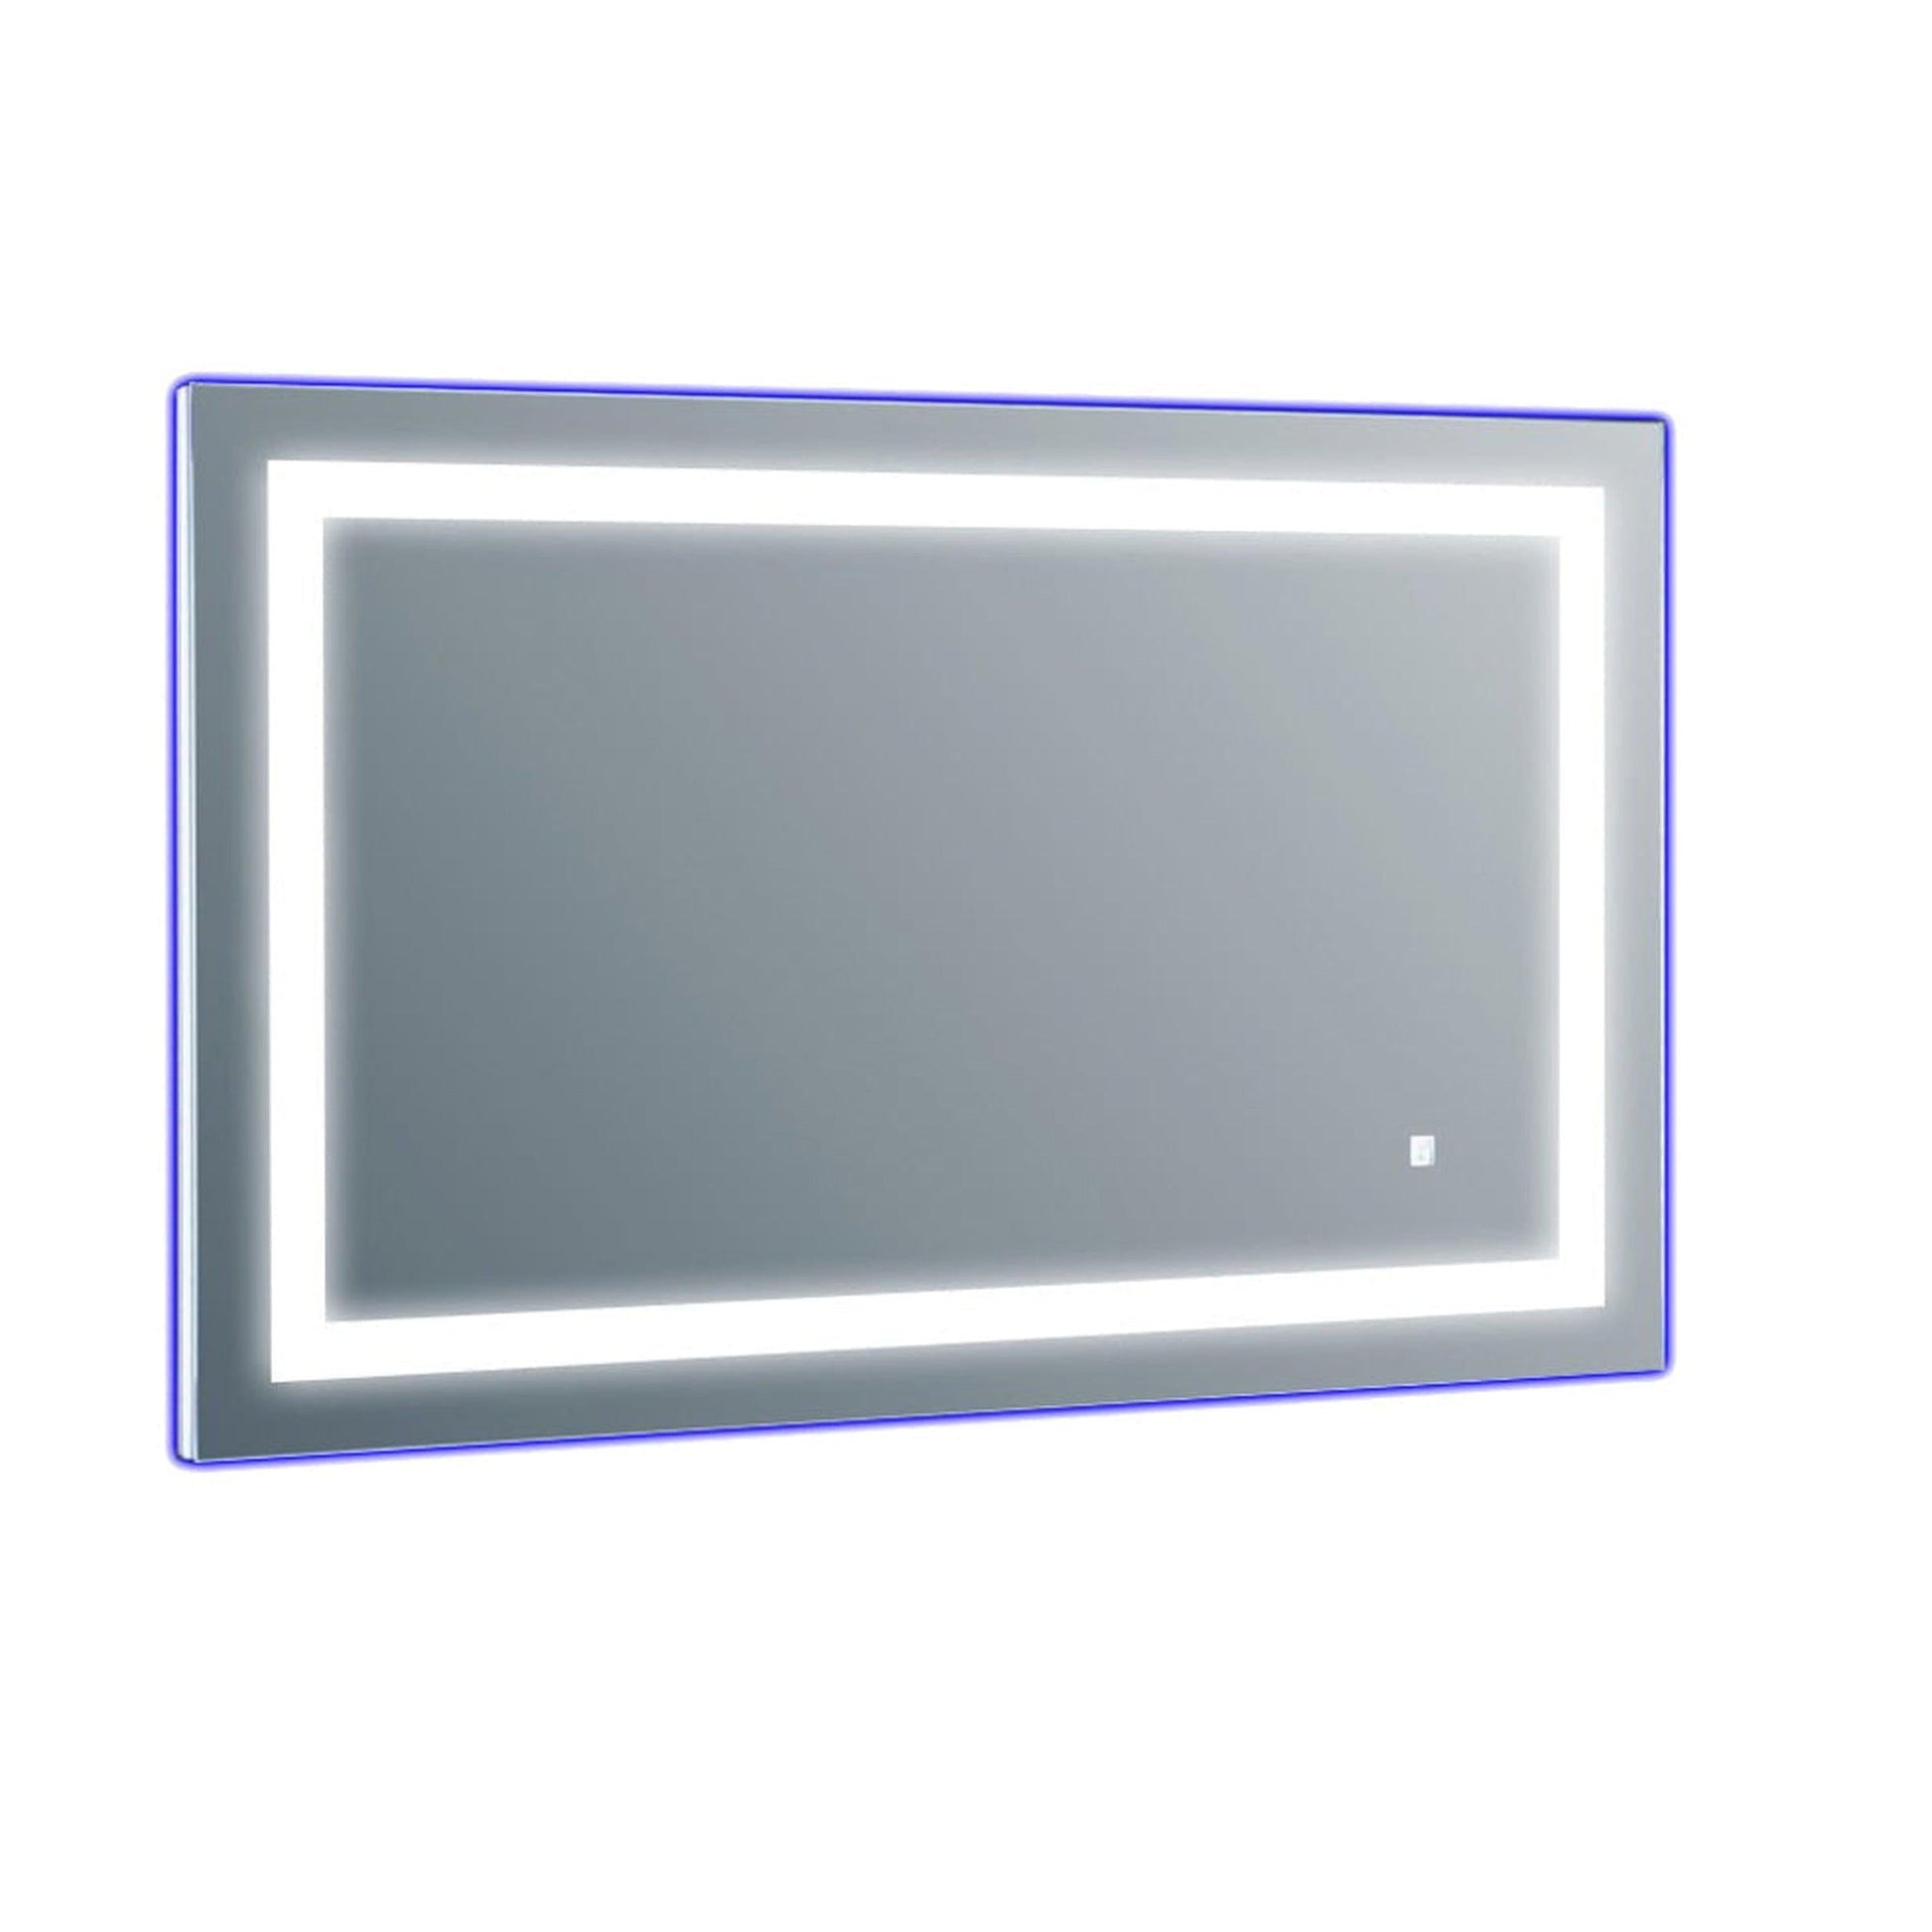 Eviva Deco Piece 47" x 30" Wall-Mounted Bathroom Vanity Mirror with Backlit LED and Frame Lights